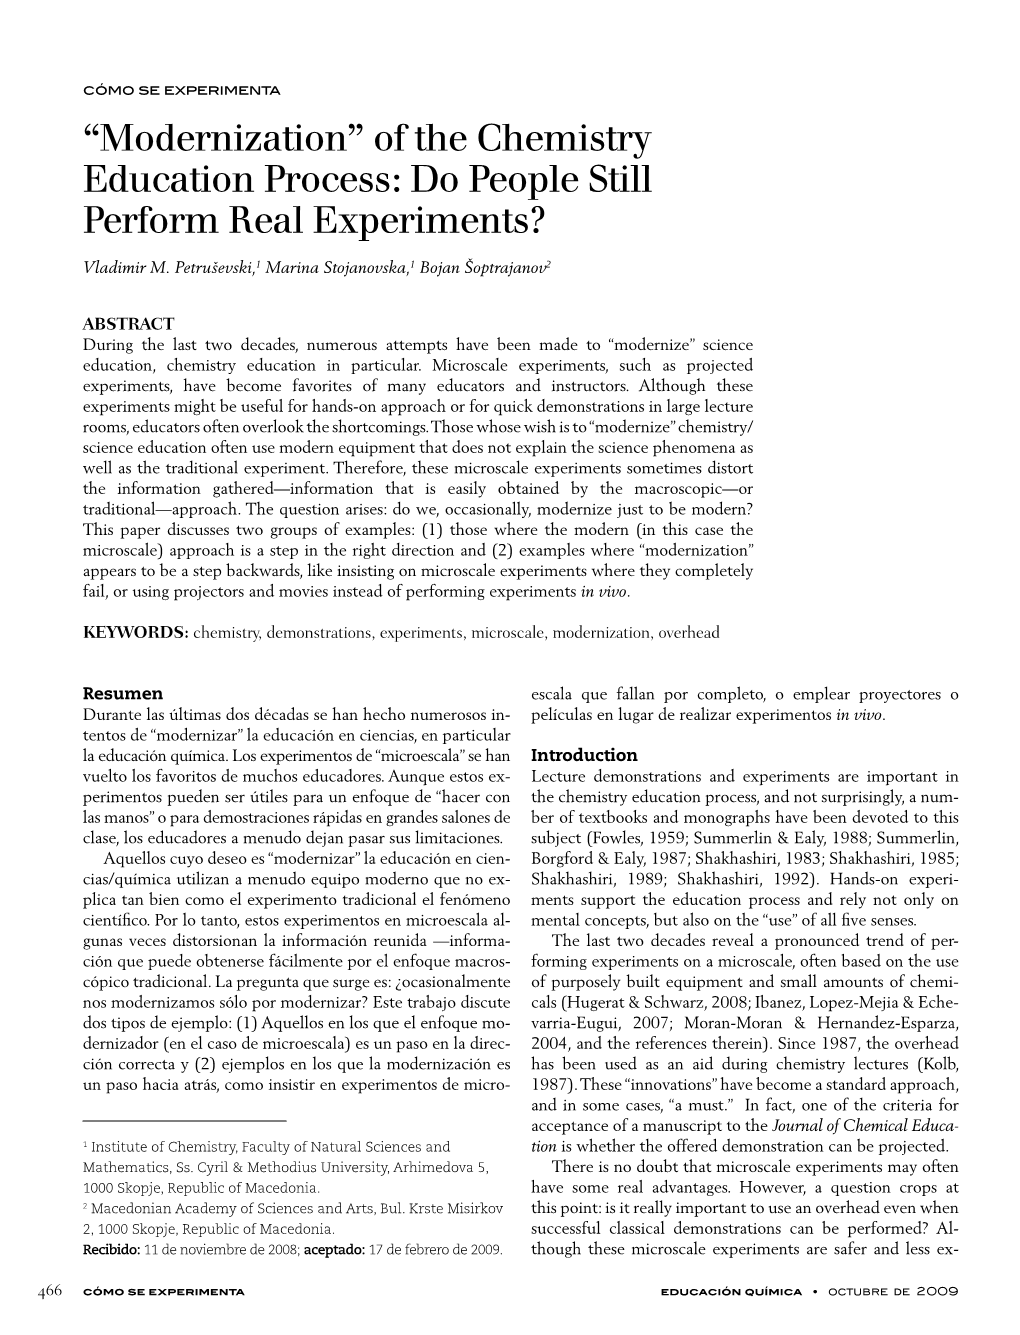 “Modernization” of the Chemistry Education Process: Do People Still Perform Real Experiments?